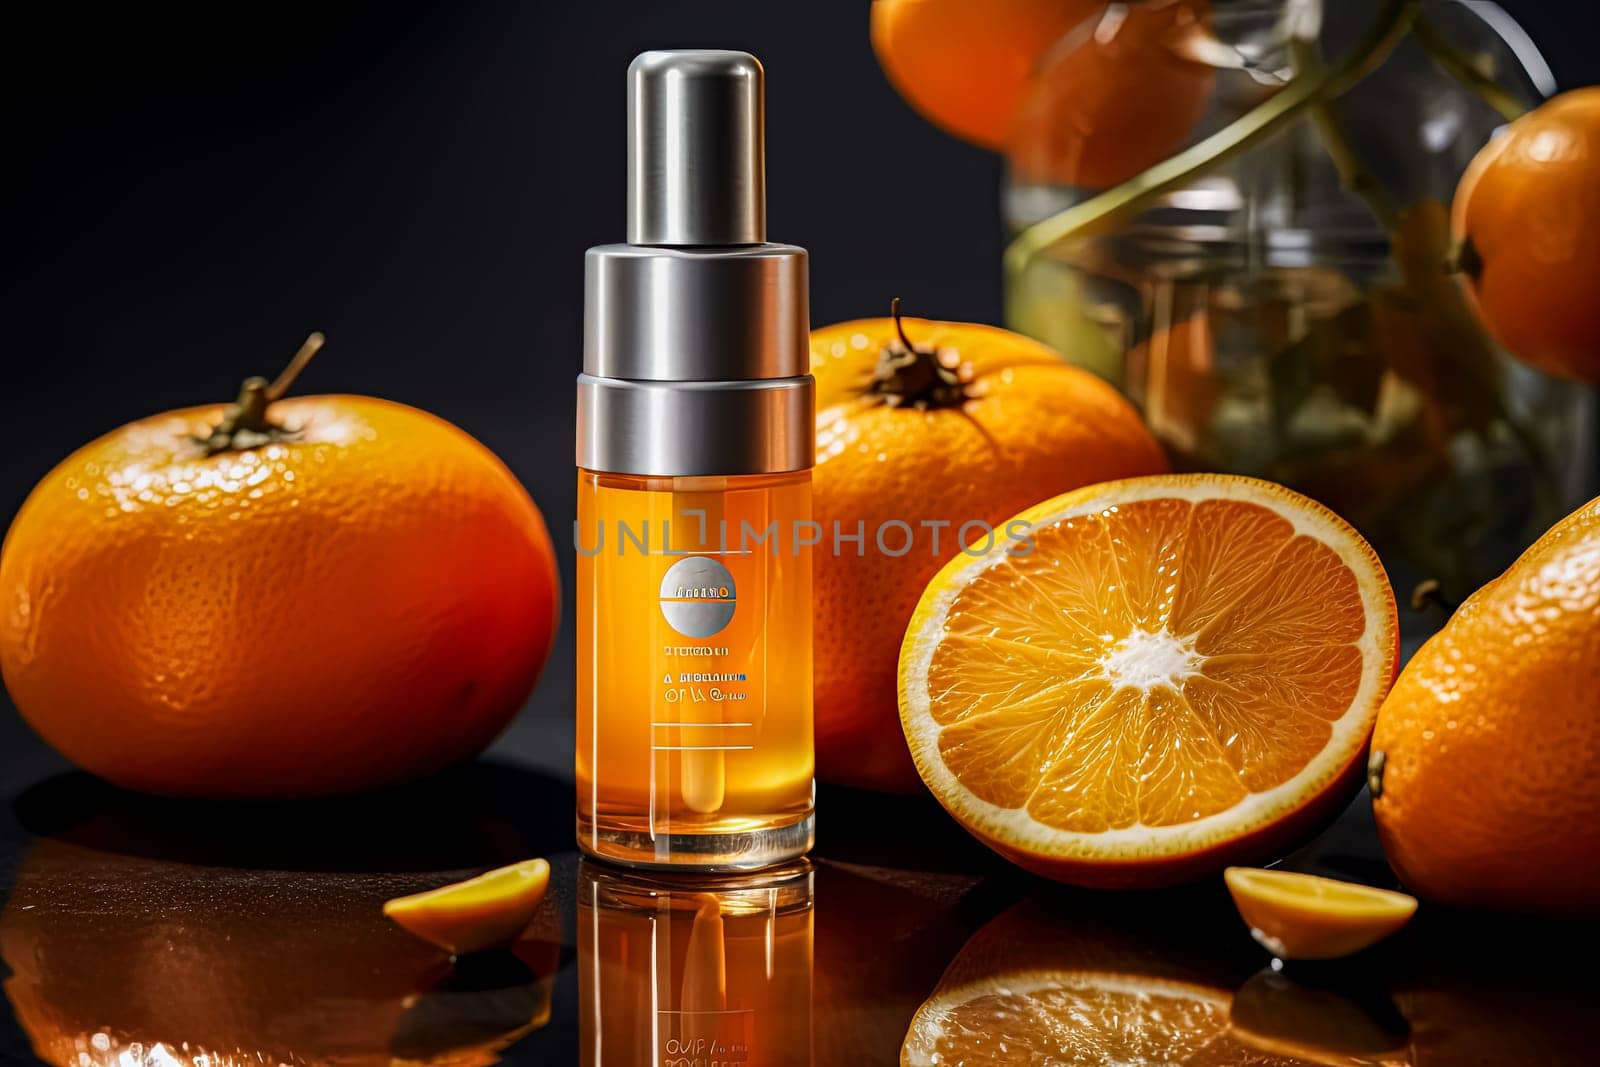 A bottle of orange face oil sits on the table surrounded by oranges, representing natural skincare.